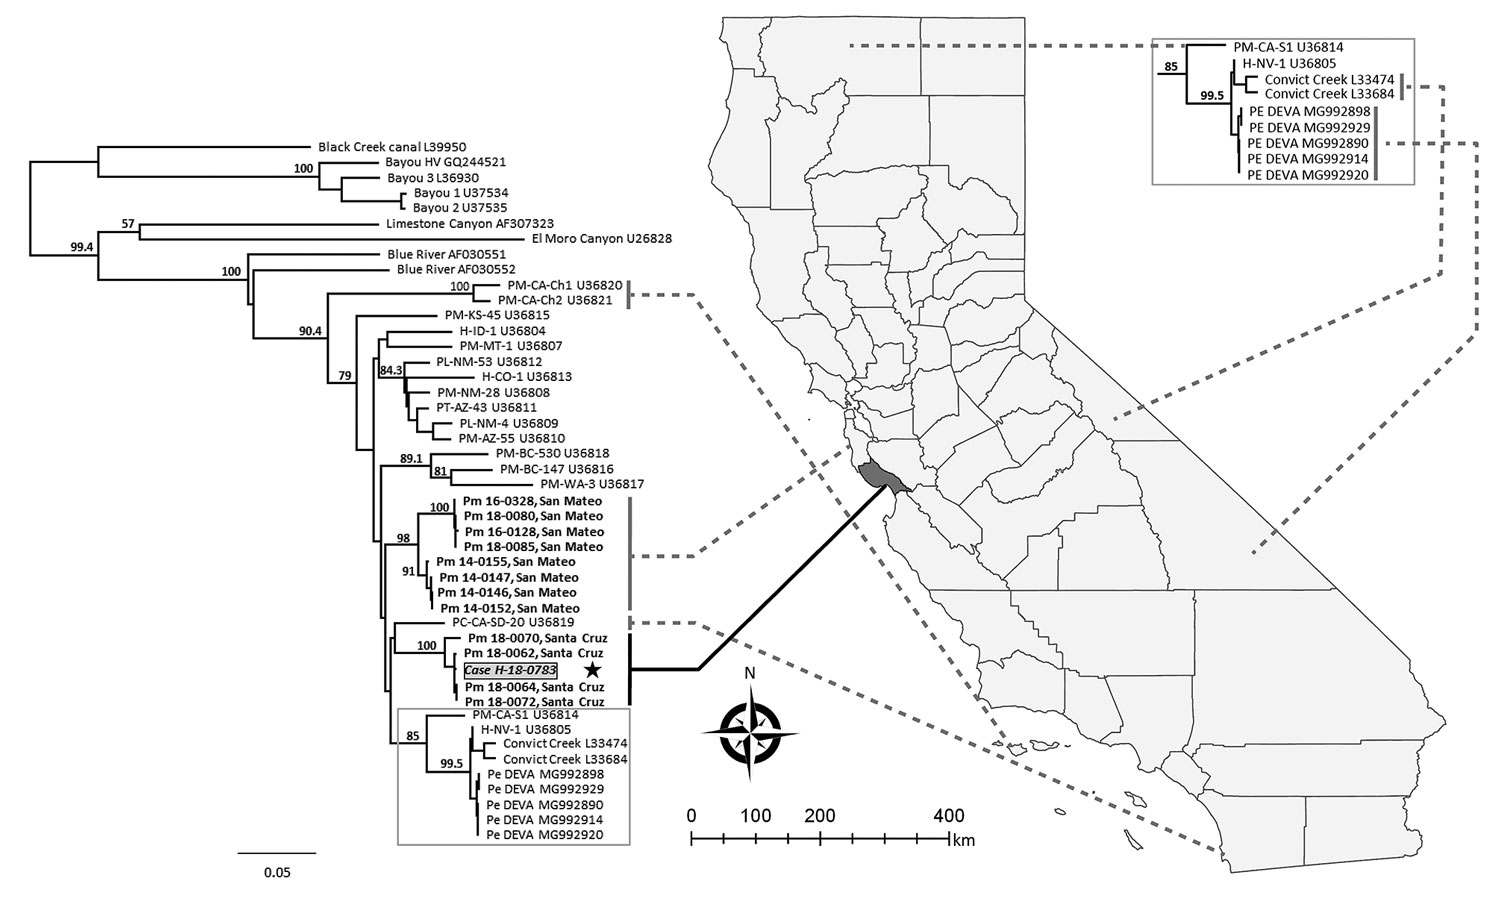 Phylogenetic tree of hantavirus Gn glycoprotein sequences from isolates collected in California, USA, and reference sequences. The hantavirus sequence from the case-patient described in this study (grey box) is shown in comparison to sequences from the case-patient farm in Santa Cruz County and archived samples from neighboring San Mateo County (bold). Dotted lines indicate general geographic origins of California sequences. Representative reference sequences of hantaviruses were downloaded from